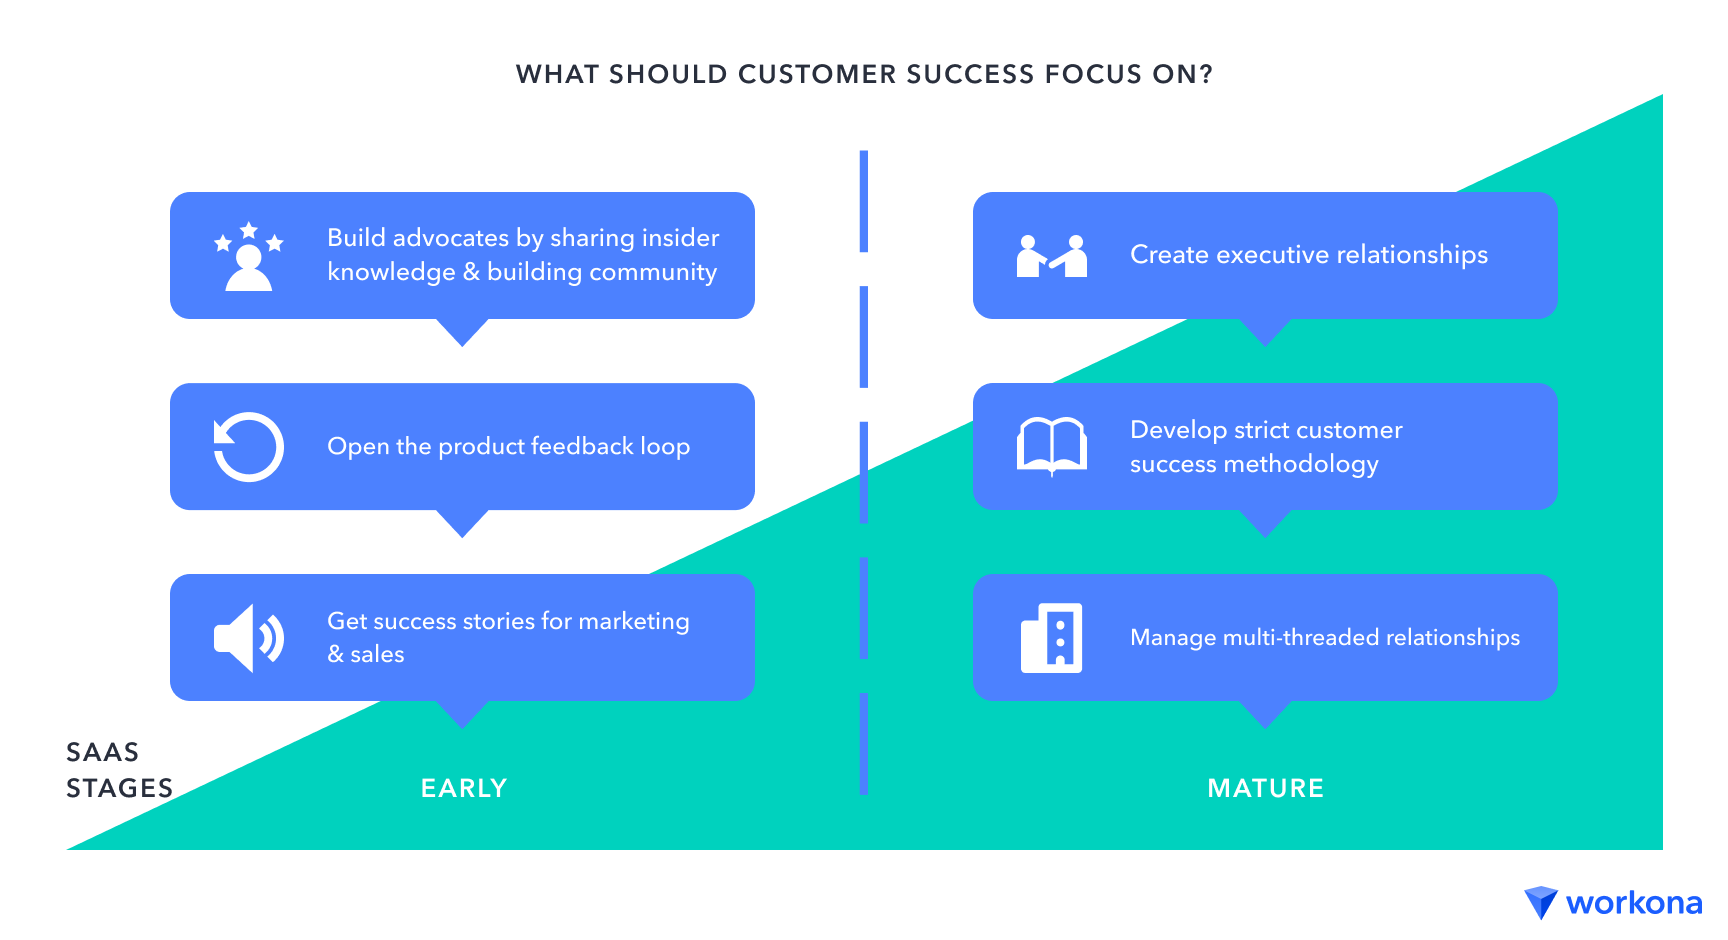 Chart with steps for a customer success team to take when a SaaS company is early versus mature